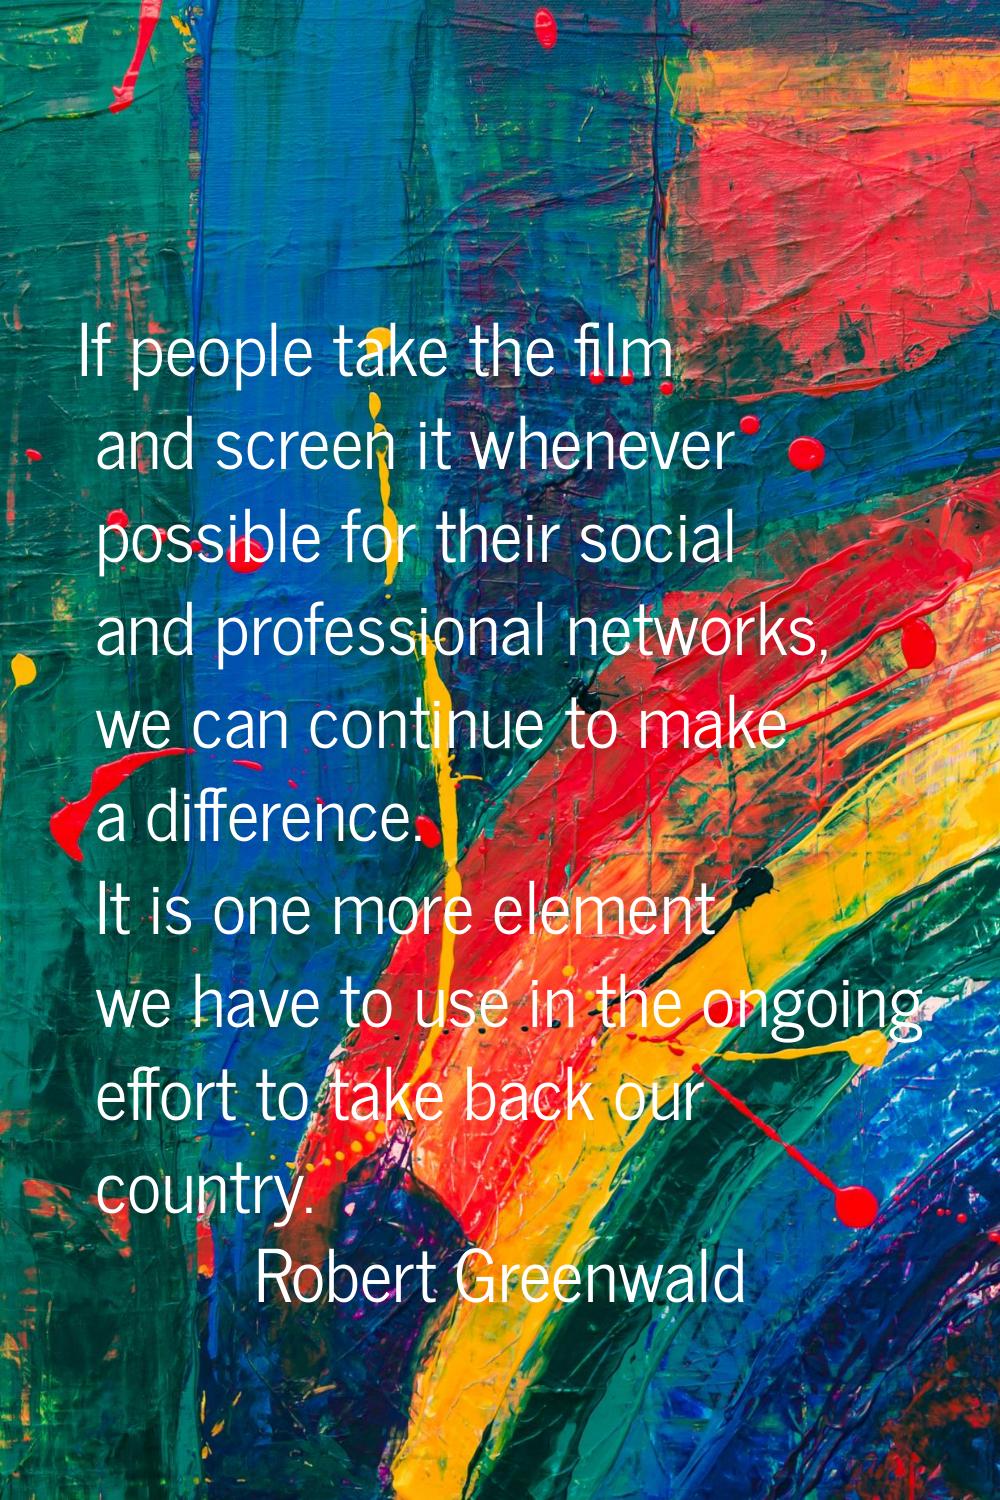 If people take the film and screen it whenever possible for their social and professional networks,